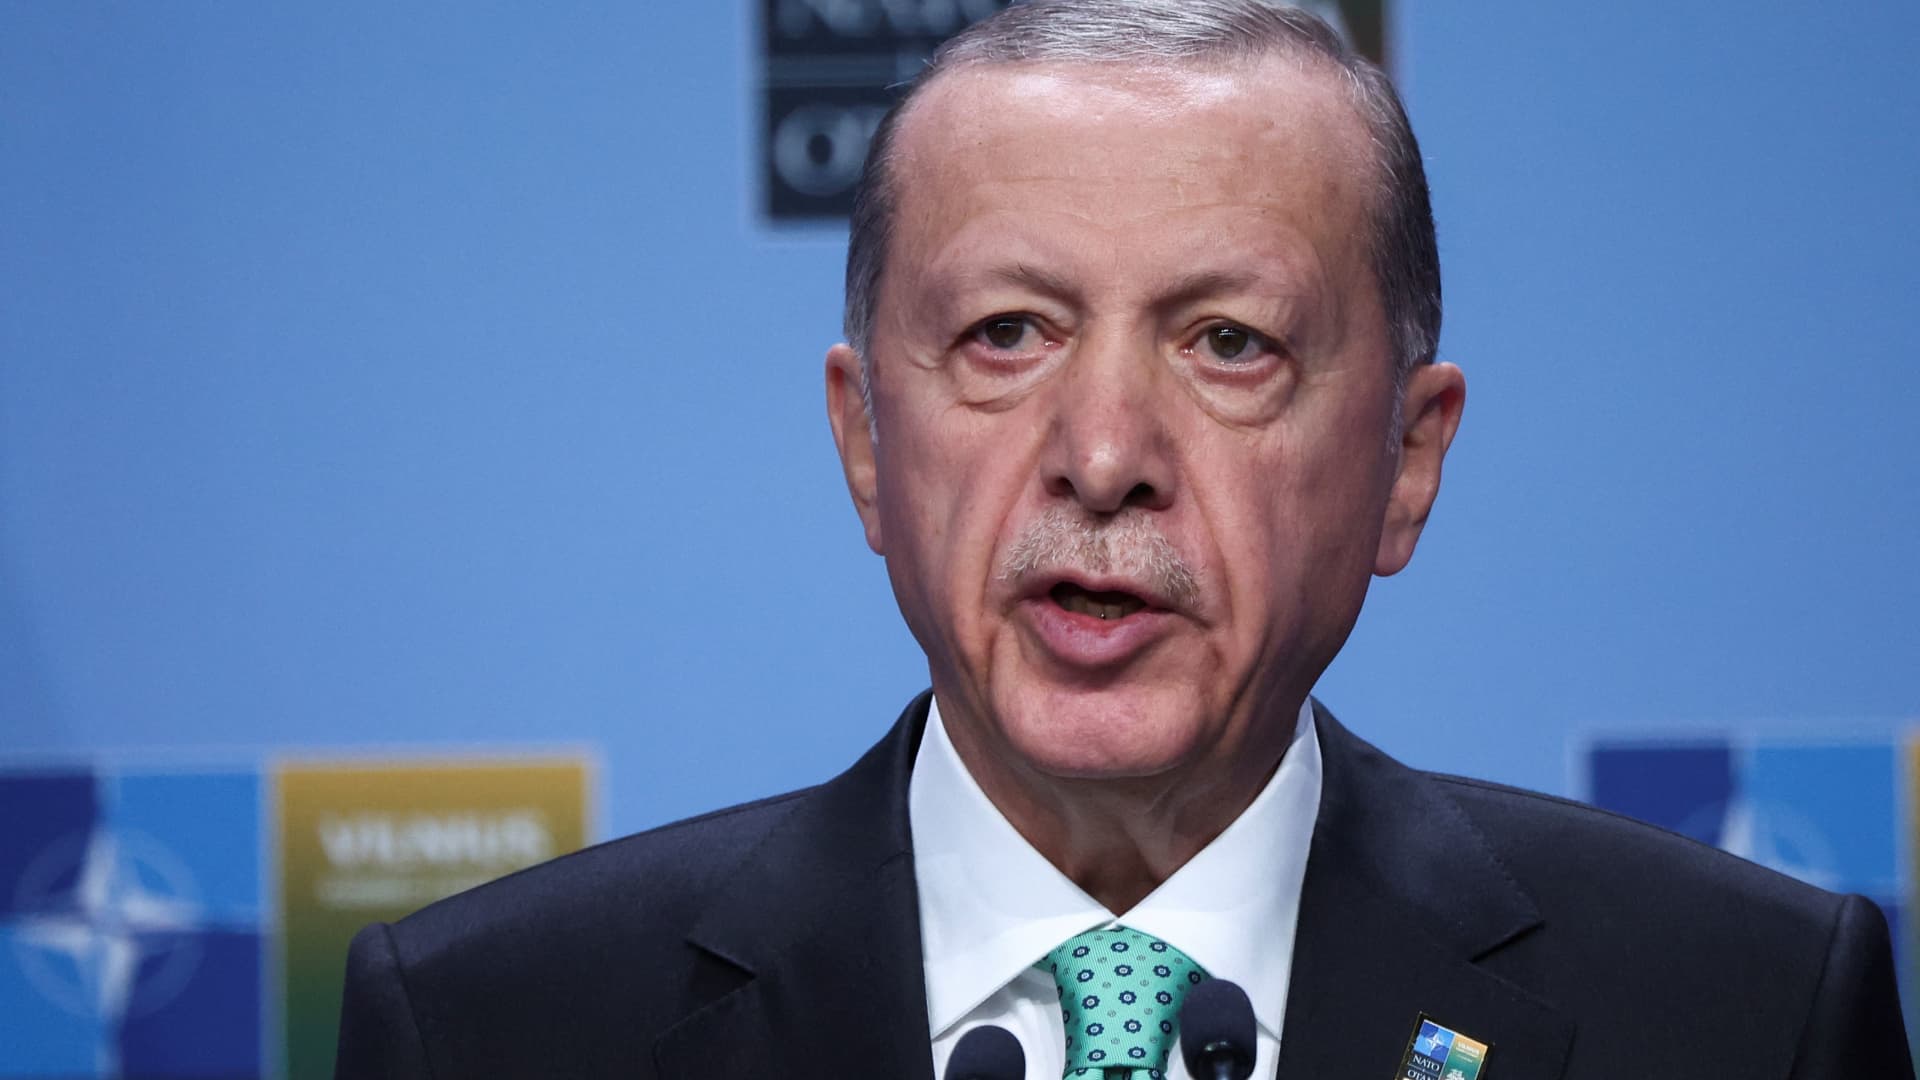 Turkish President Recep Tayyip Erdoğan expressed confidence that the lapsed Ukraine grain deal can be revived, while urging the West to heed Russian President Vladimir Putin's demands.